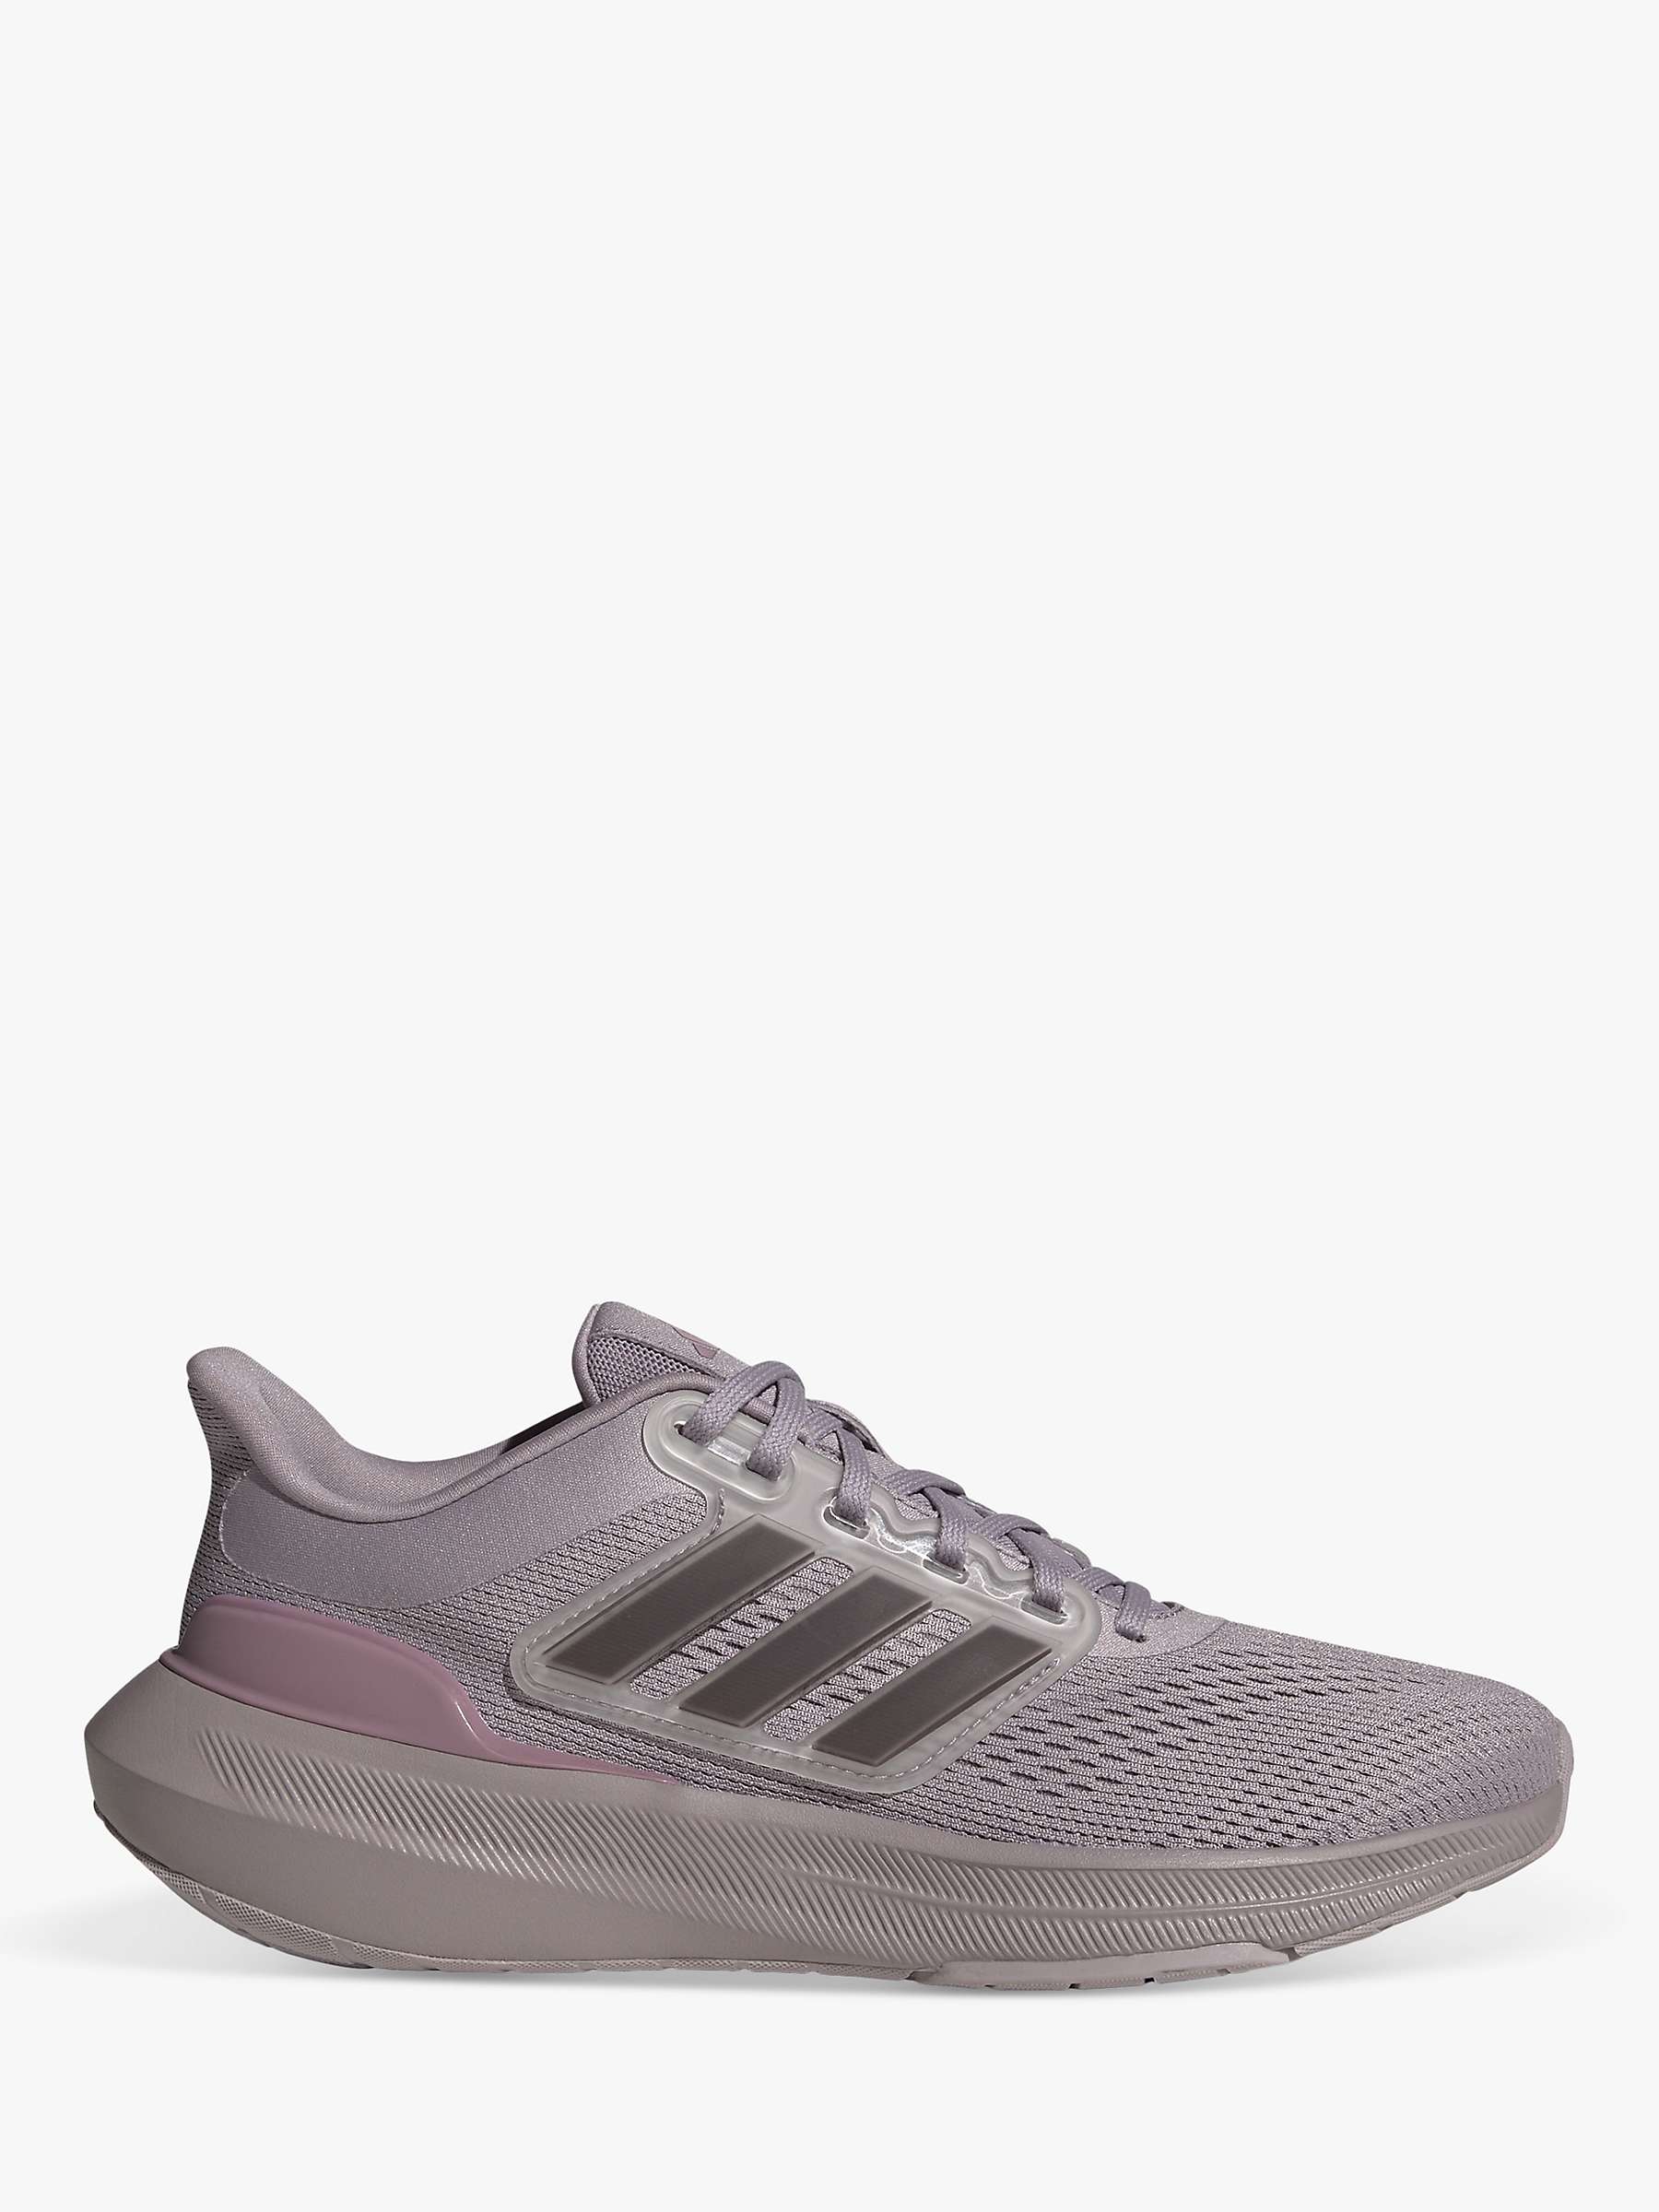 Buy adidas Ultrabounce Women's Running Shoes Online at johnlewis.com